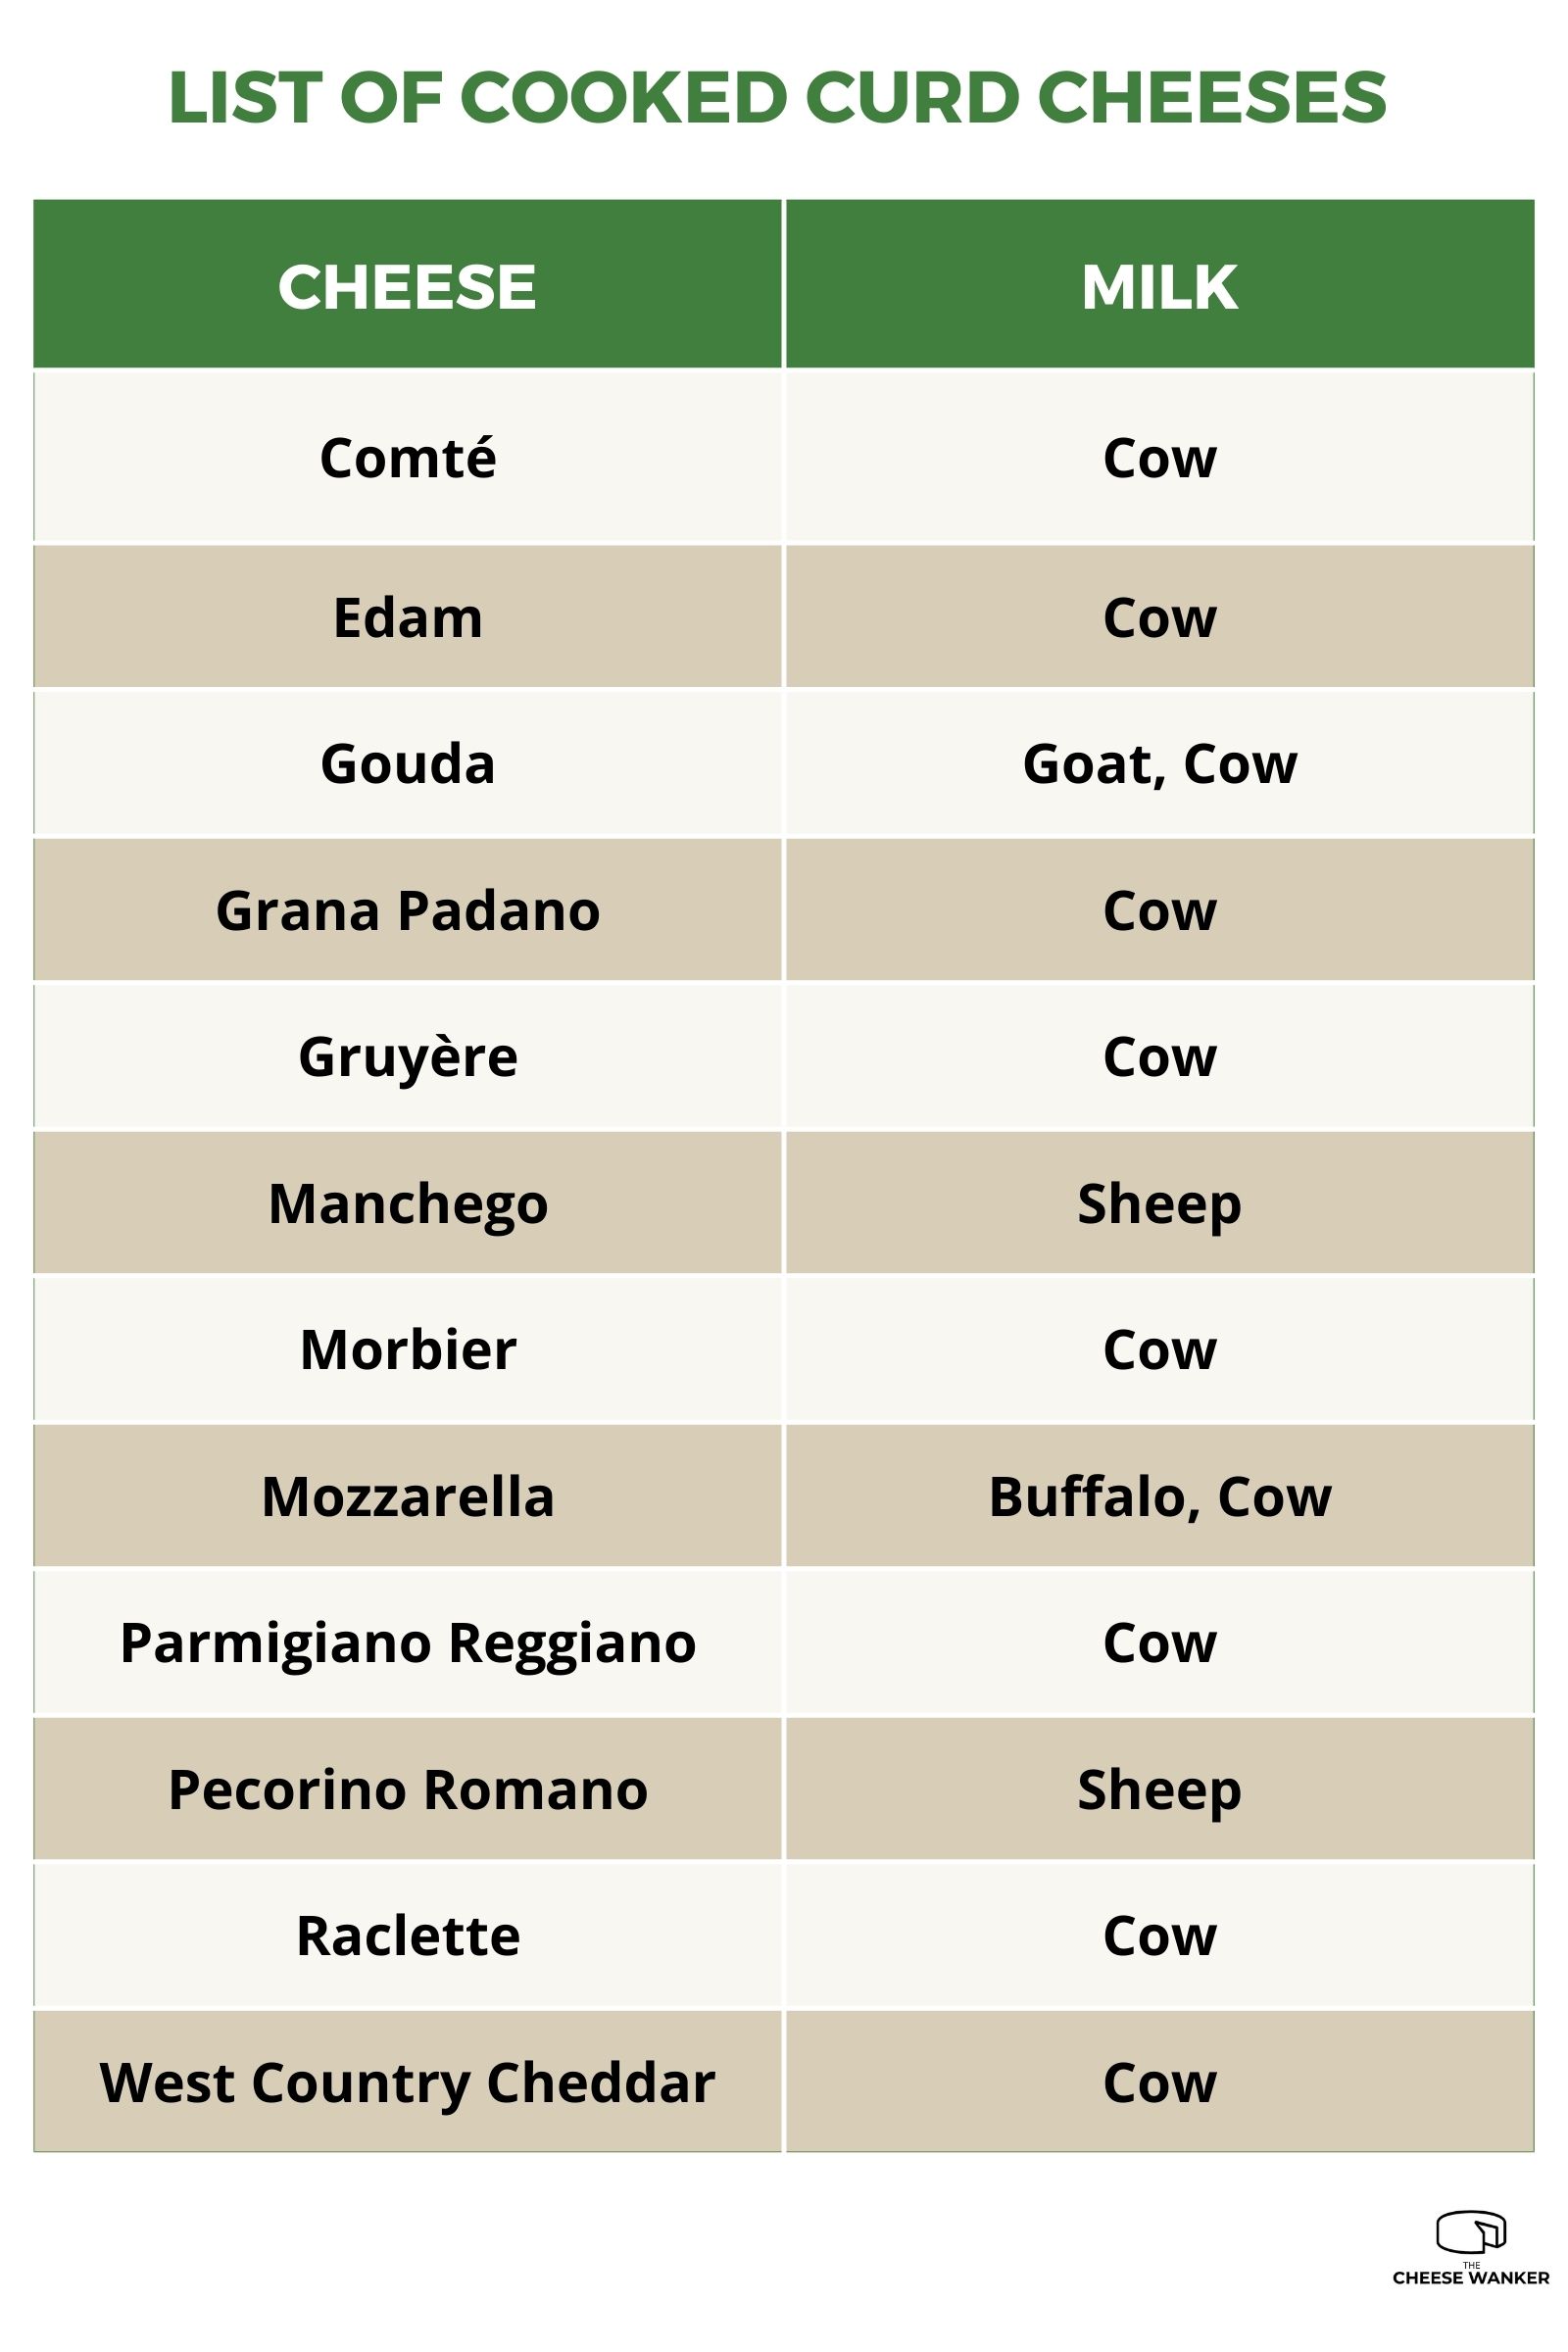 List of Cooked Curd Cheeses